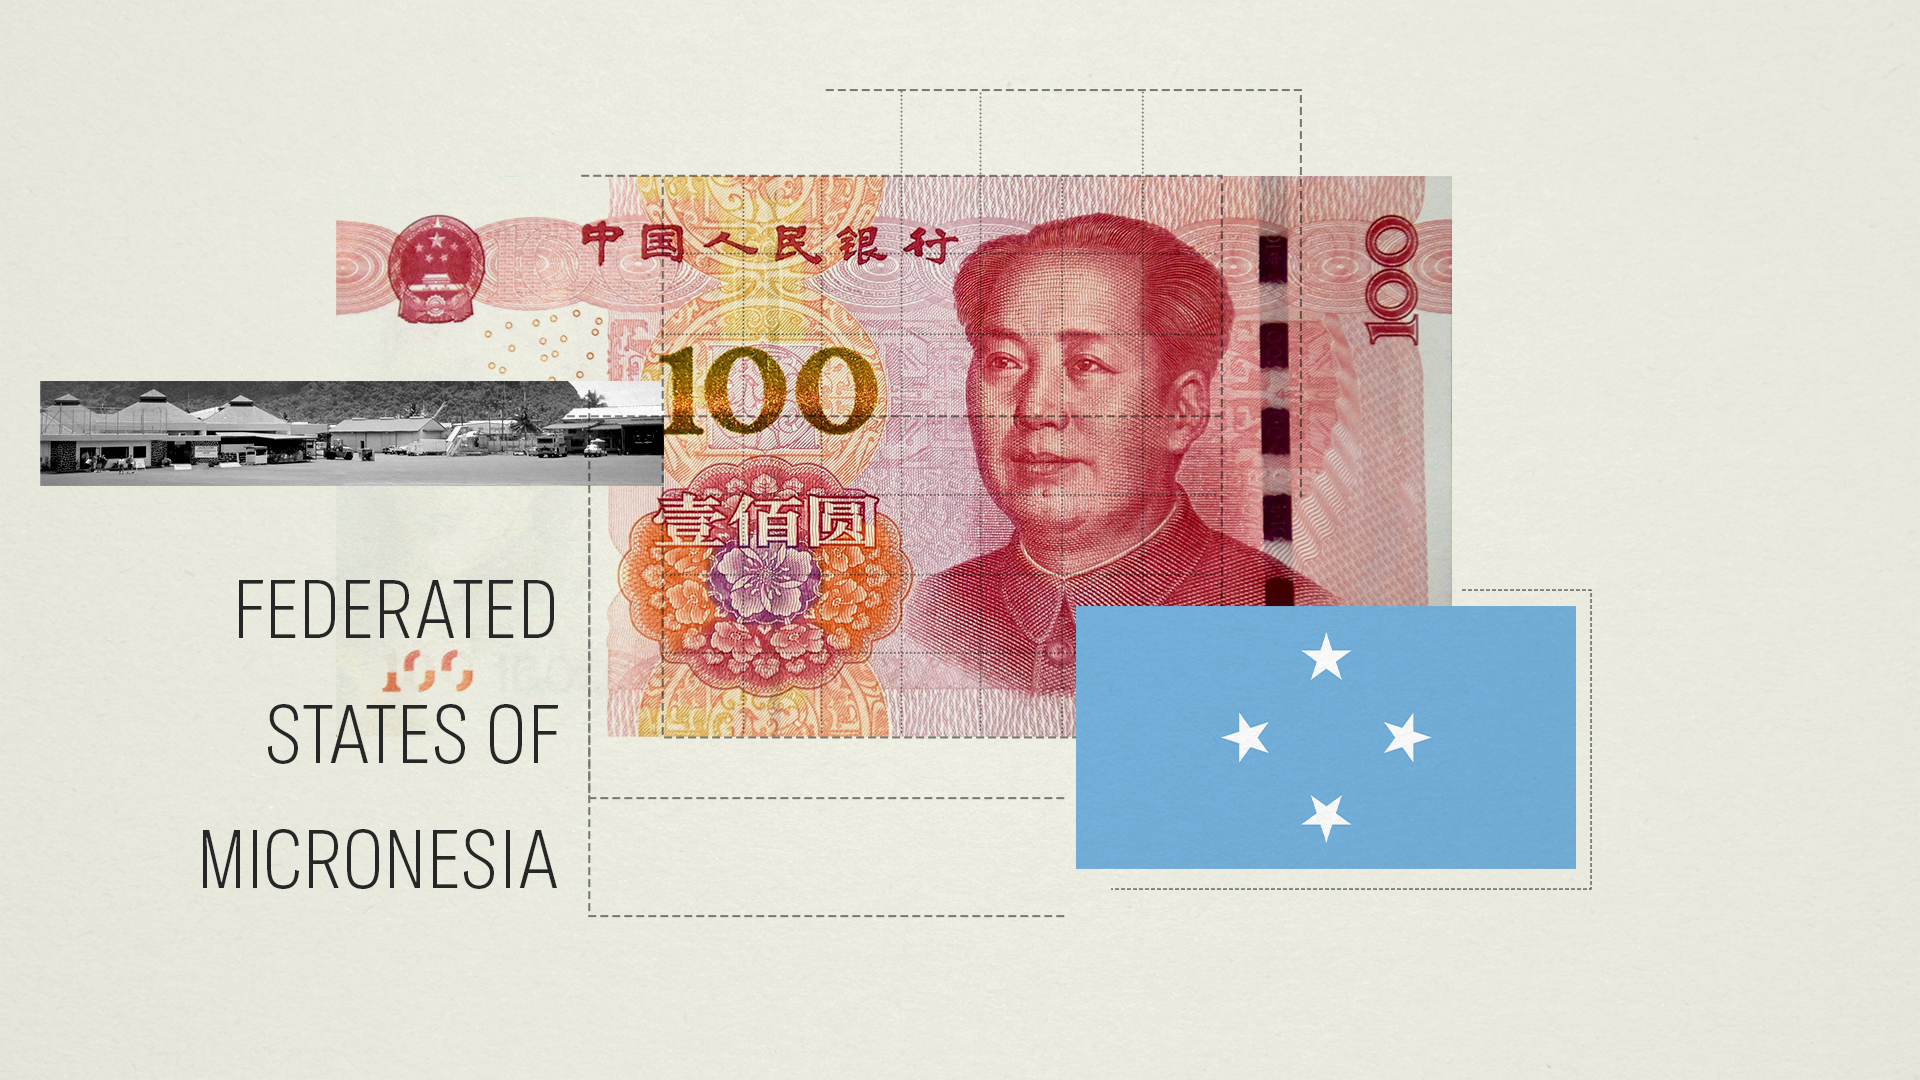 Federated States of Micronesia flag with a Chinese bank note in the background.